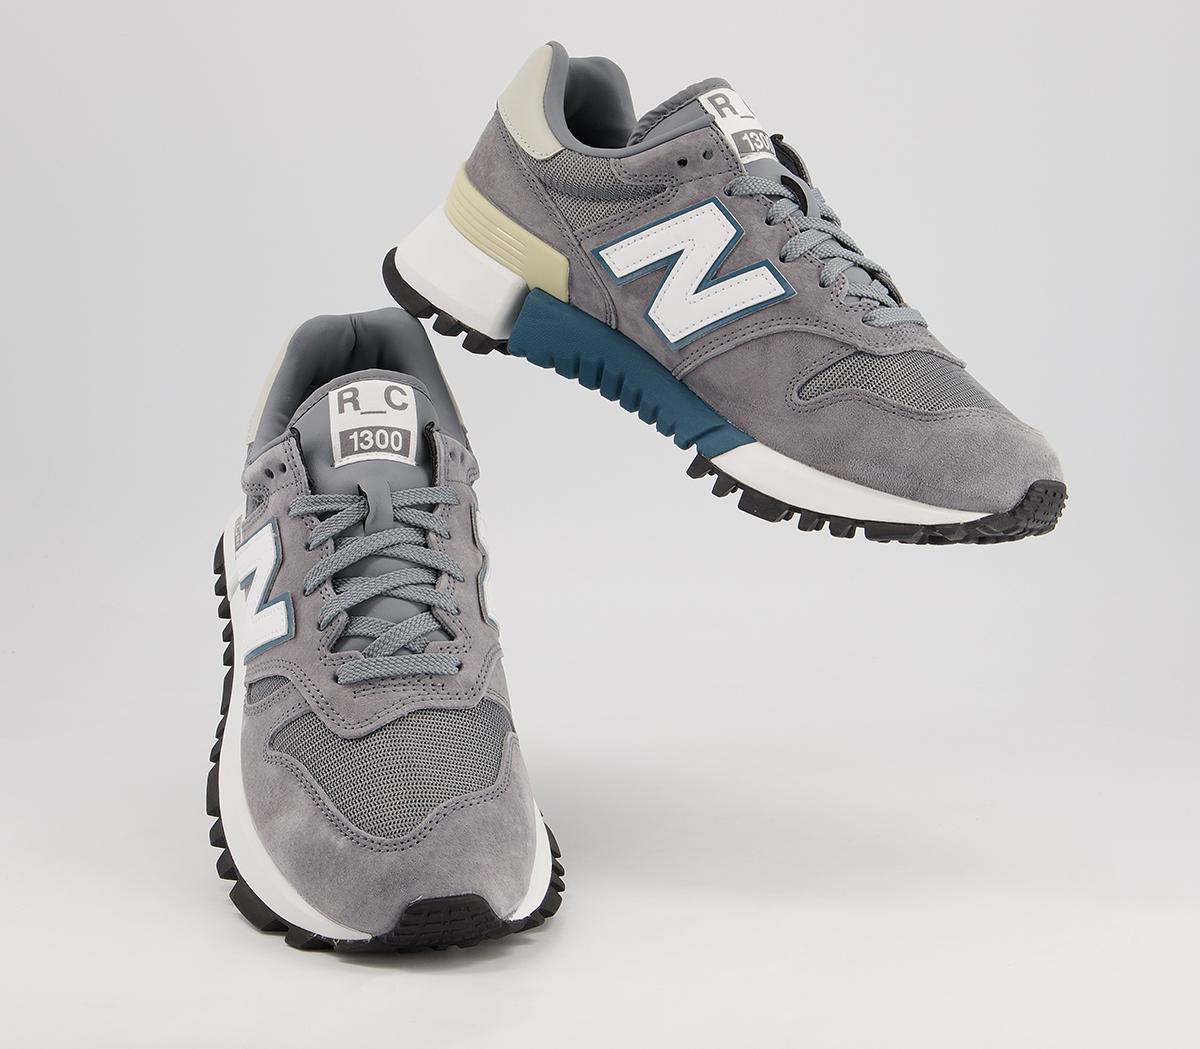 New Balance Rc1300 Trainers Grey Grey - Men's Trainers